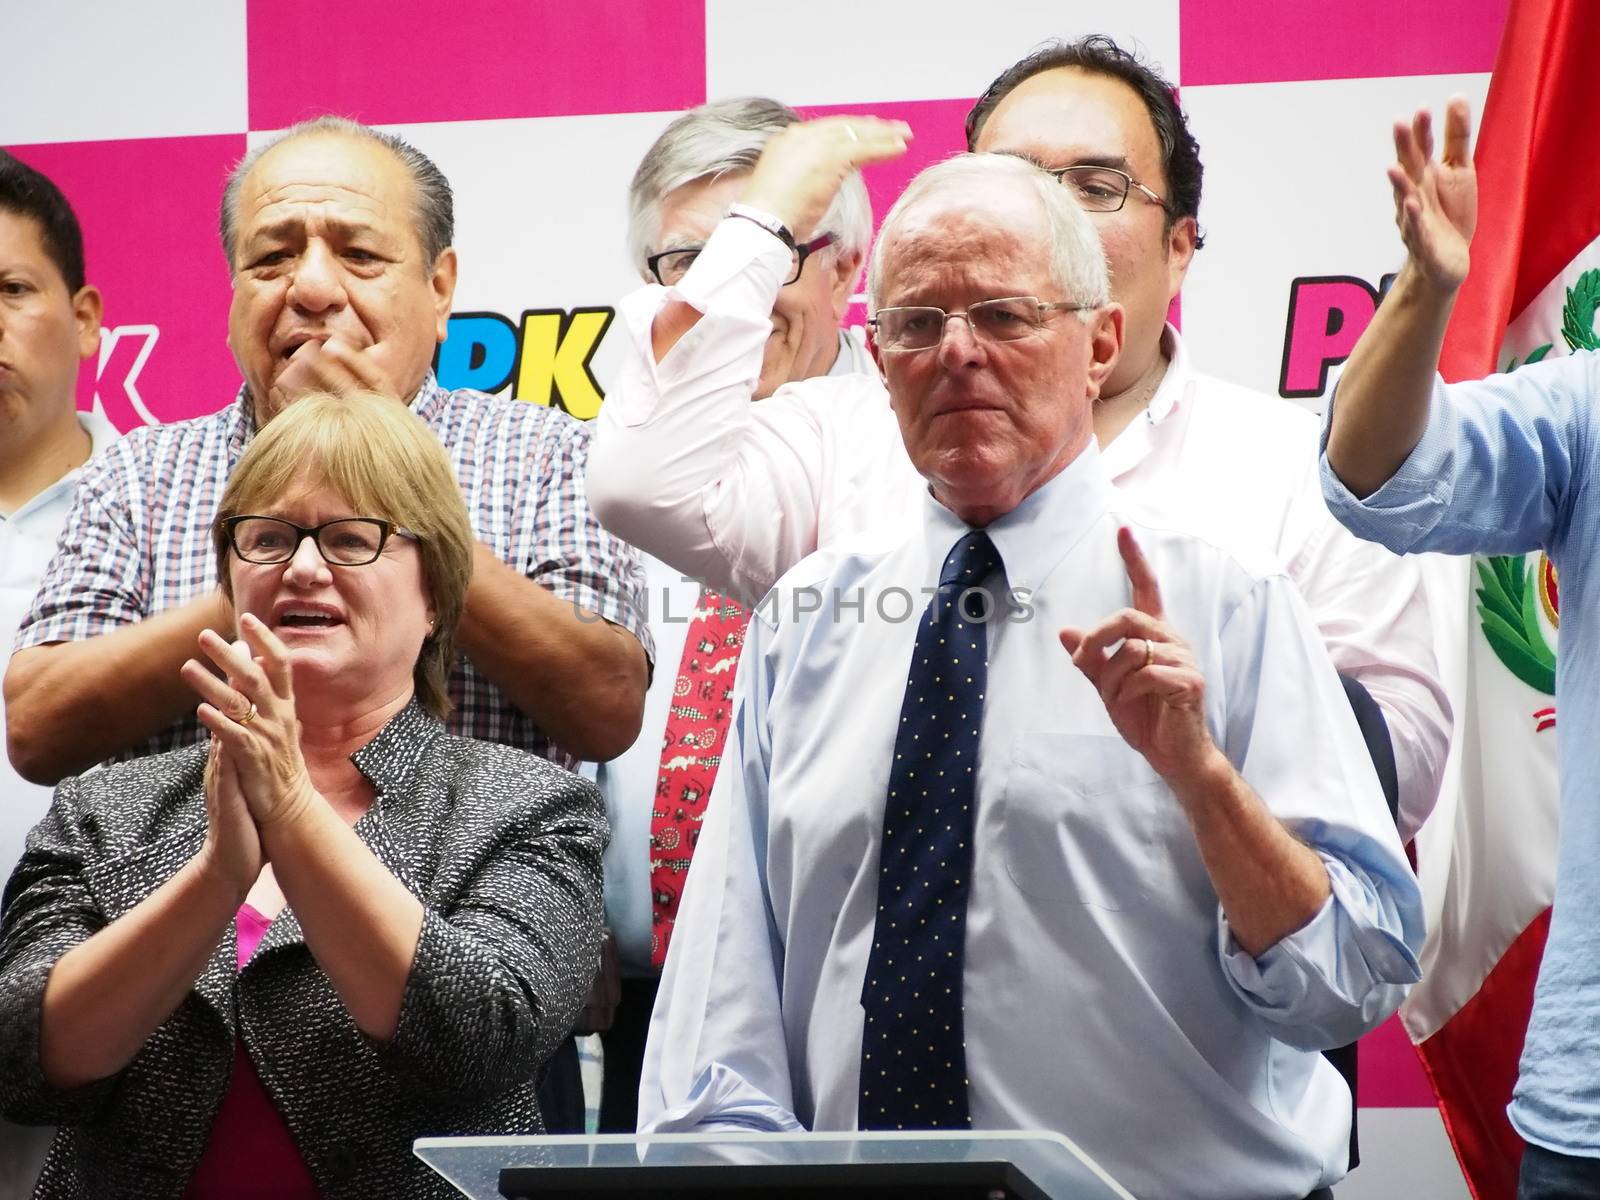 PERU, Lima: Peruvian presidential candidate for Peruanos por el Kambio (Peruvians for Change Party) and centre-right former World Bank economist Pedro Pablo Kuczynski meets with his supporters during a press conference as he was announced in the second place following the first round of Peru's Presidential Election, in Lima, Peru on April 10, 2016. The daughter of jailed former president Alberto Fujimori will face the veteran economist Pedro Pablo Kuczynski in the June run-off. 